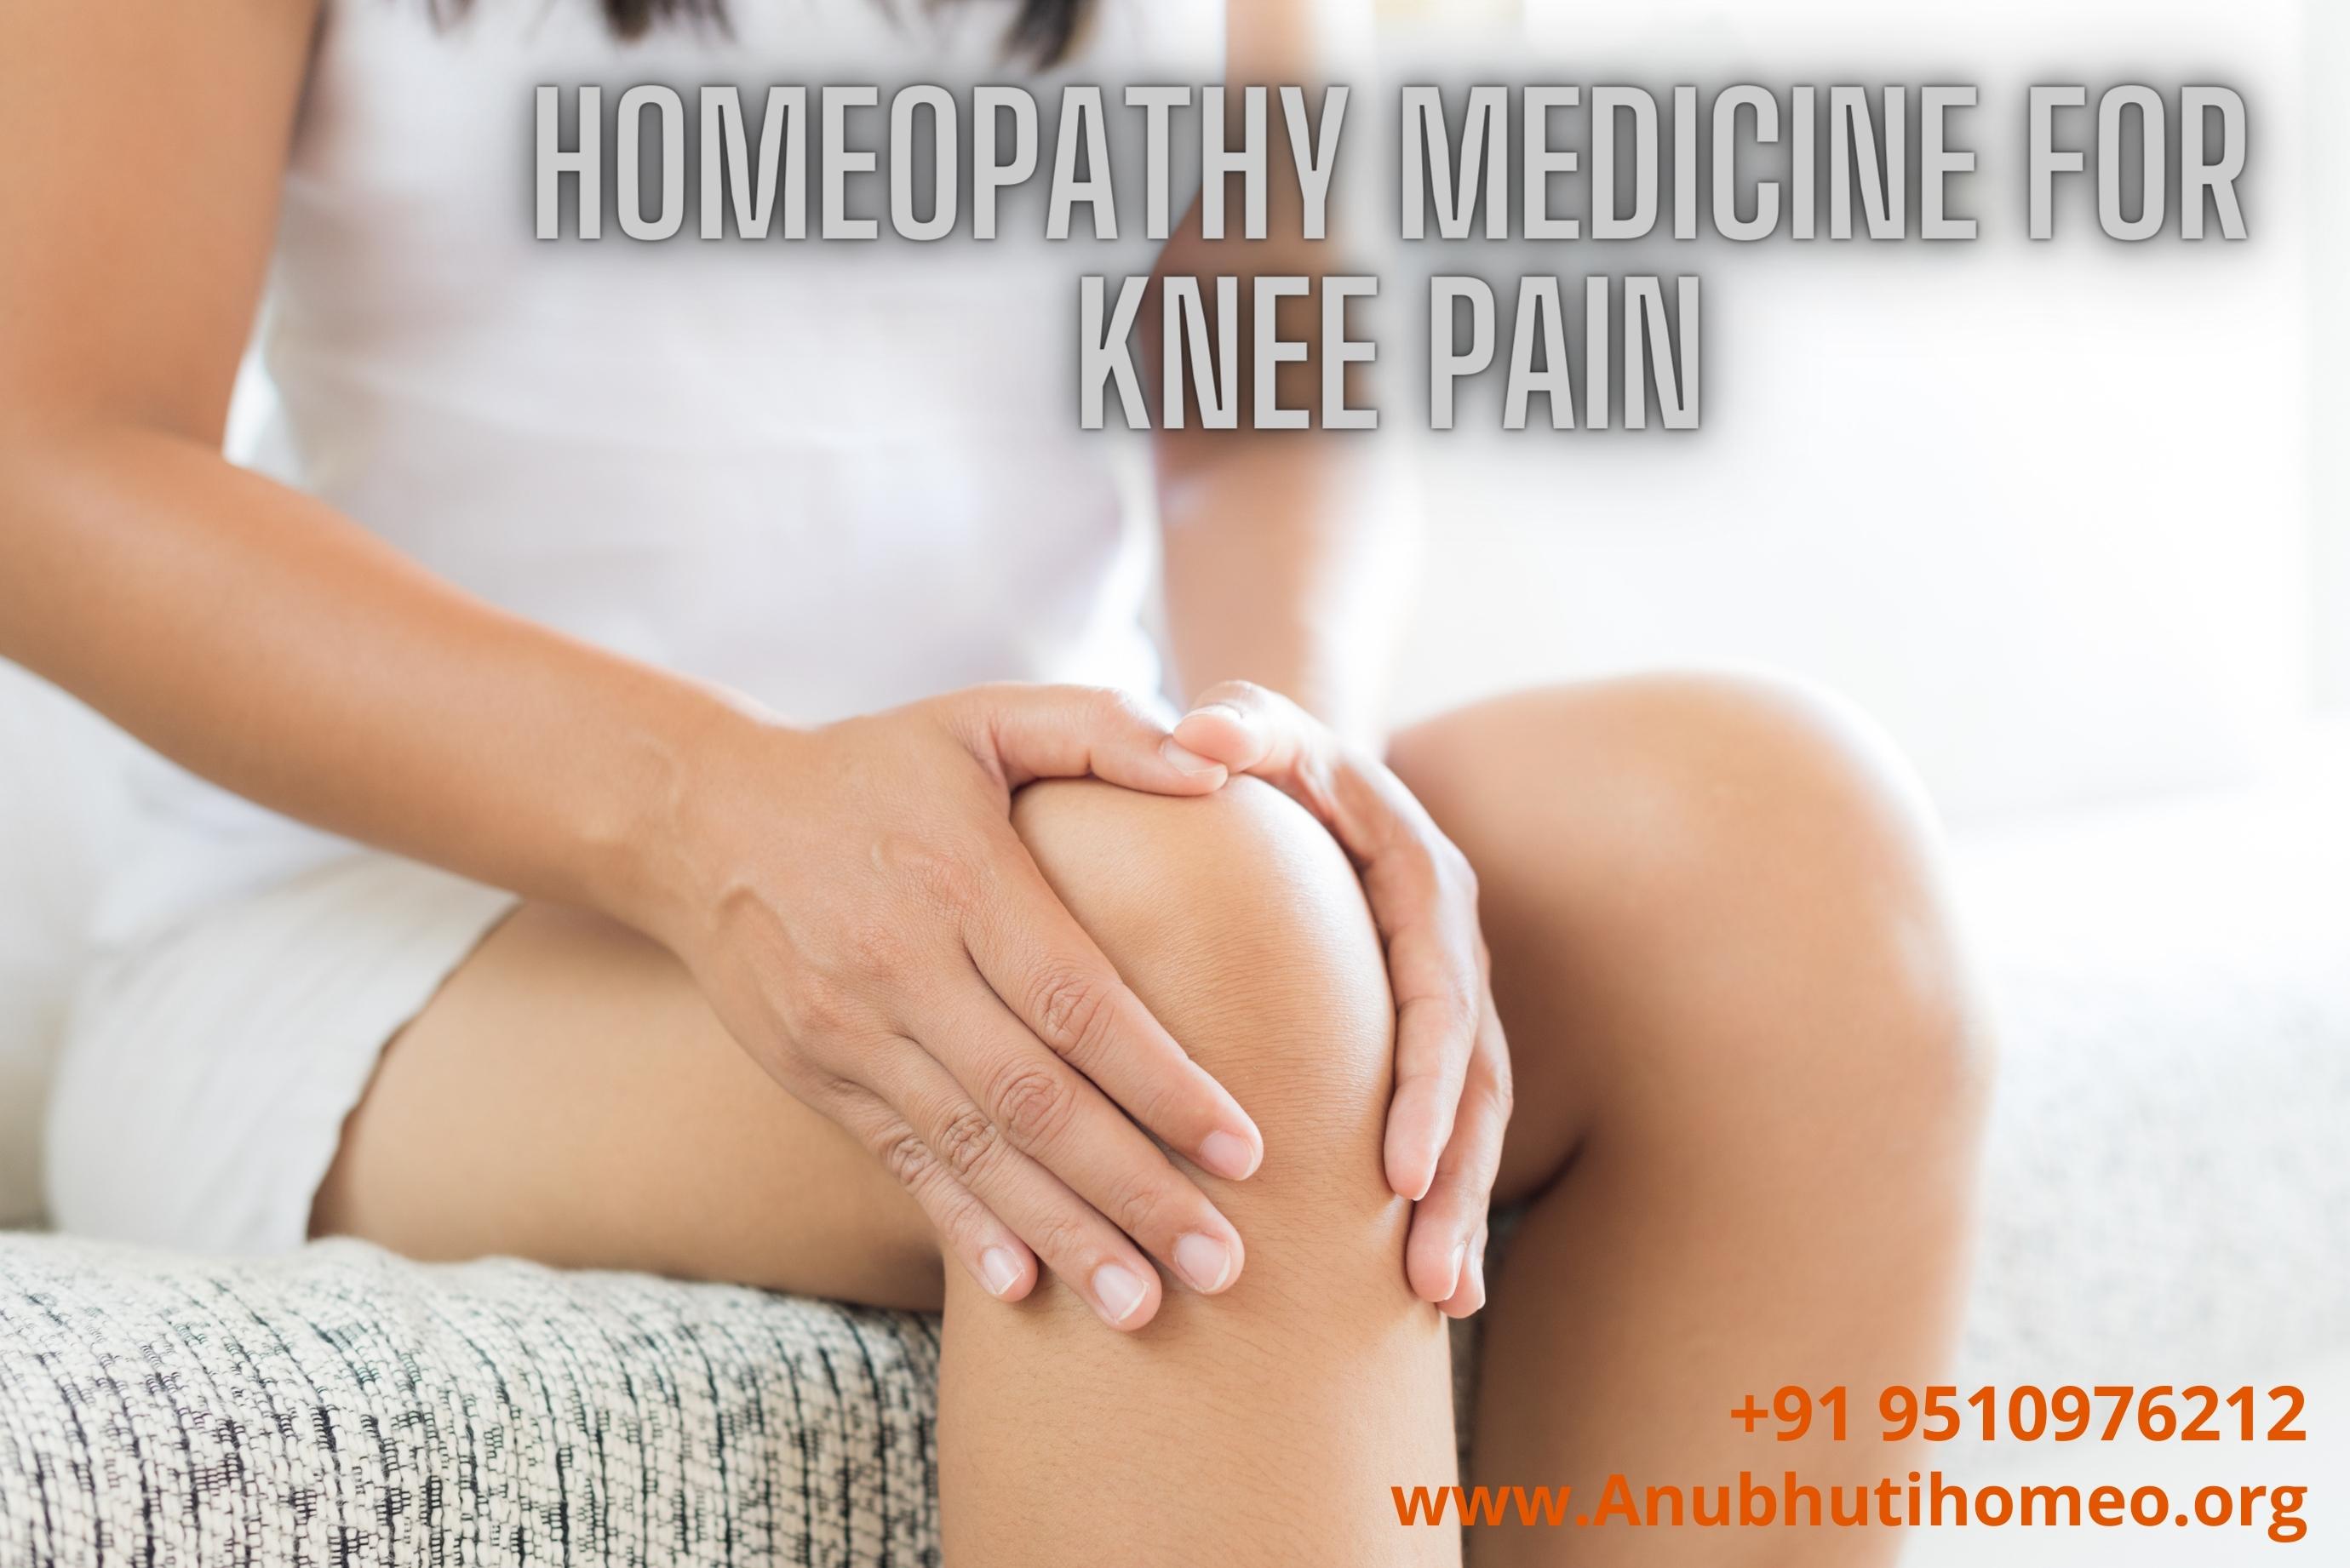 Homeopathy Medicine For Knee Pain